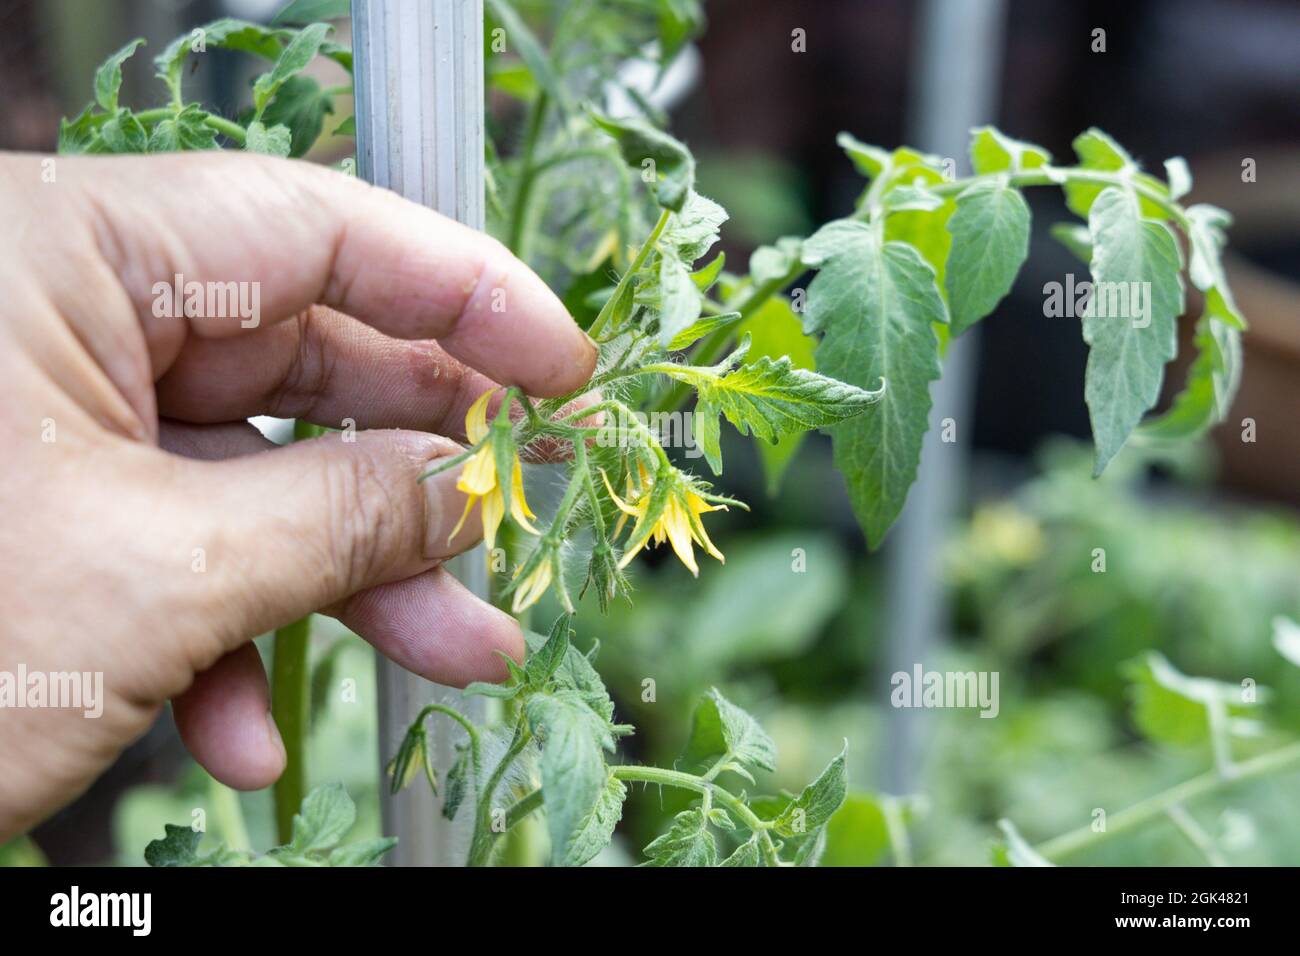 Finger tapping the tomato tree flowers to attempt manual pollination Stock Photo